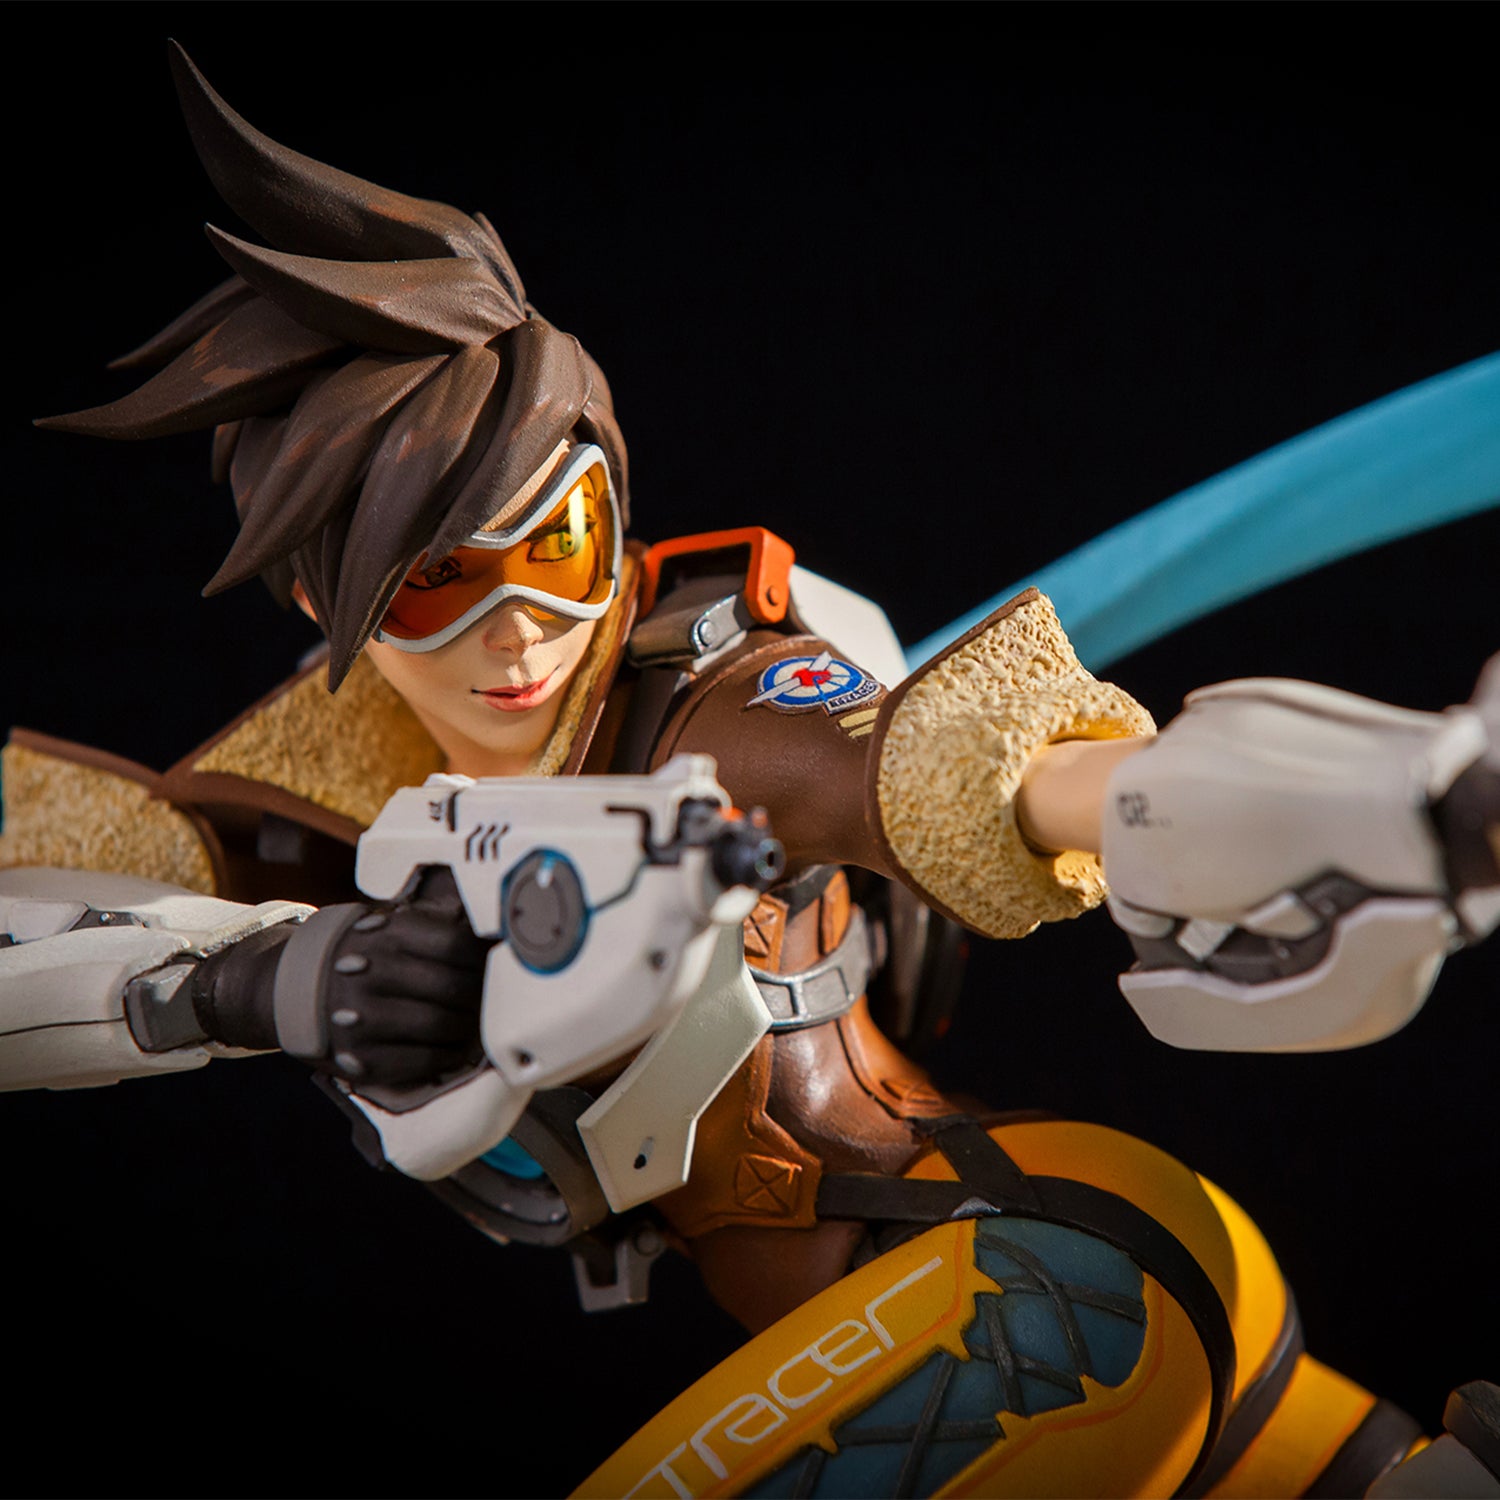 Overwatch Tracer 10.5in Premium Statue - Close Up, Detailed View Side of Statue